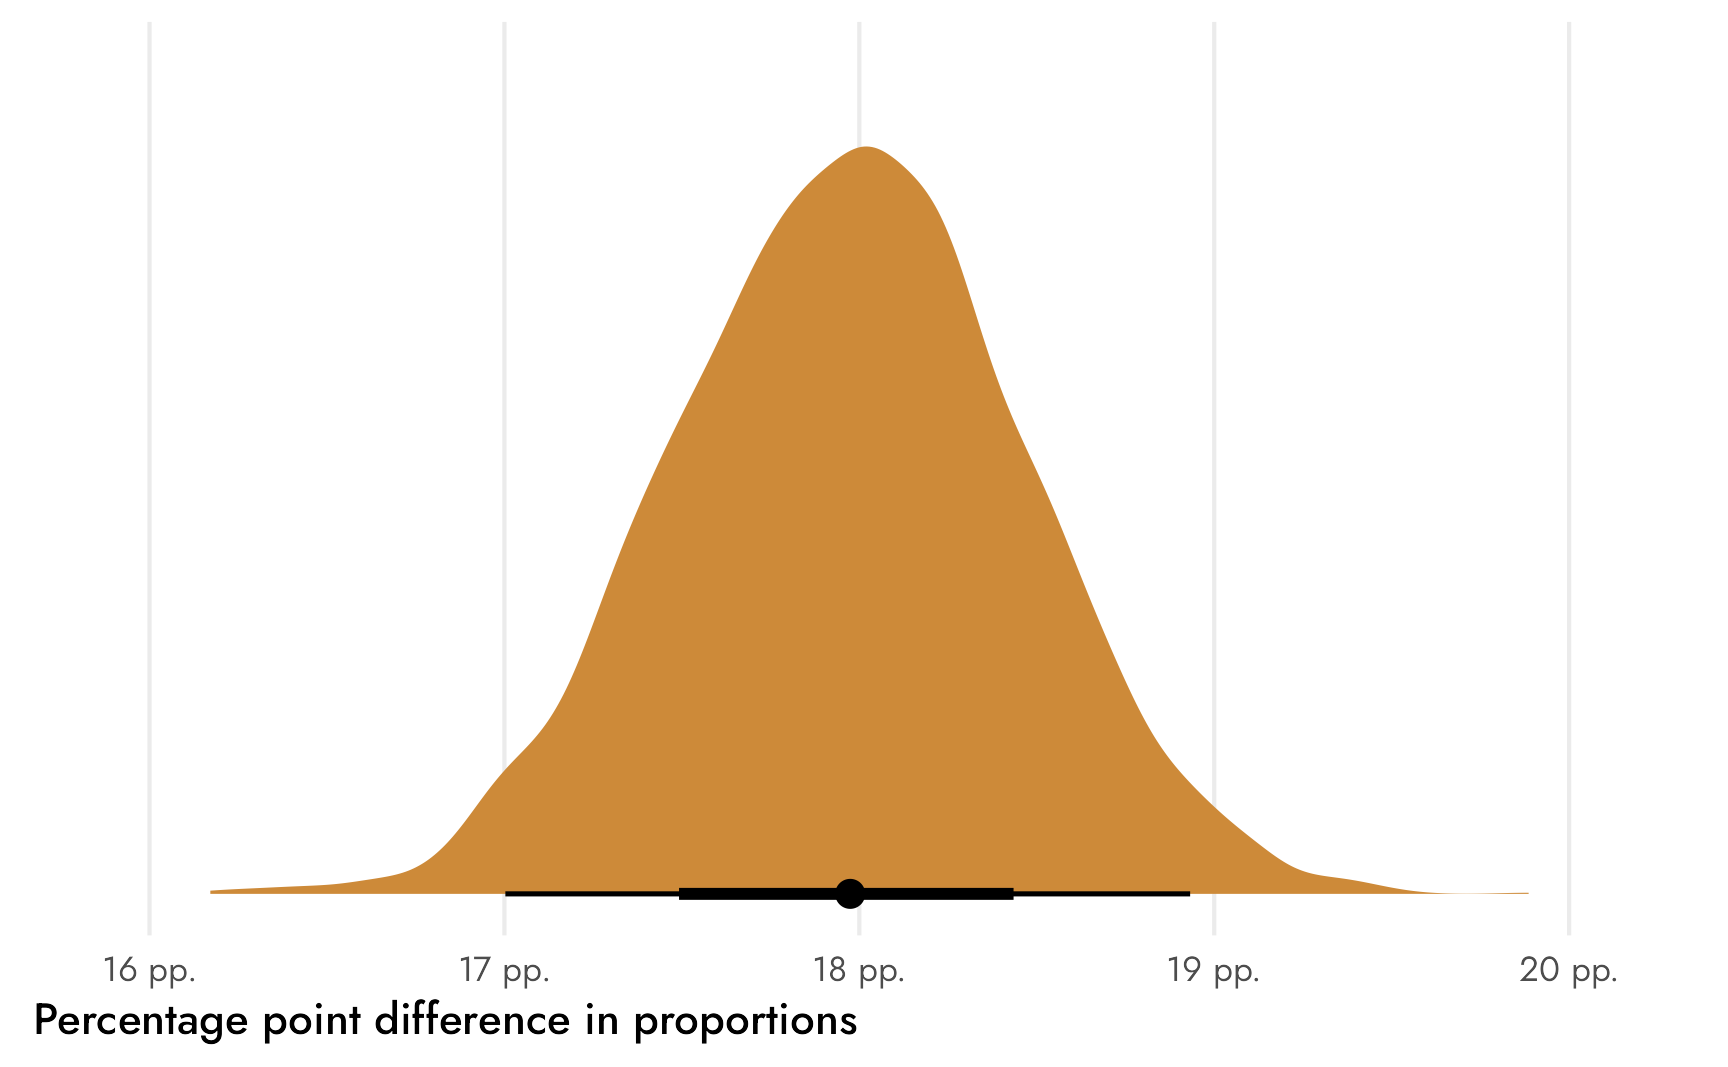 Posterior distribution of the difference in proportions of students who read comic books often in the United States and Mexico